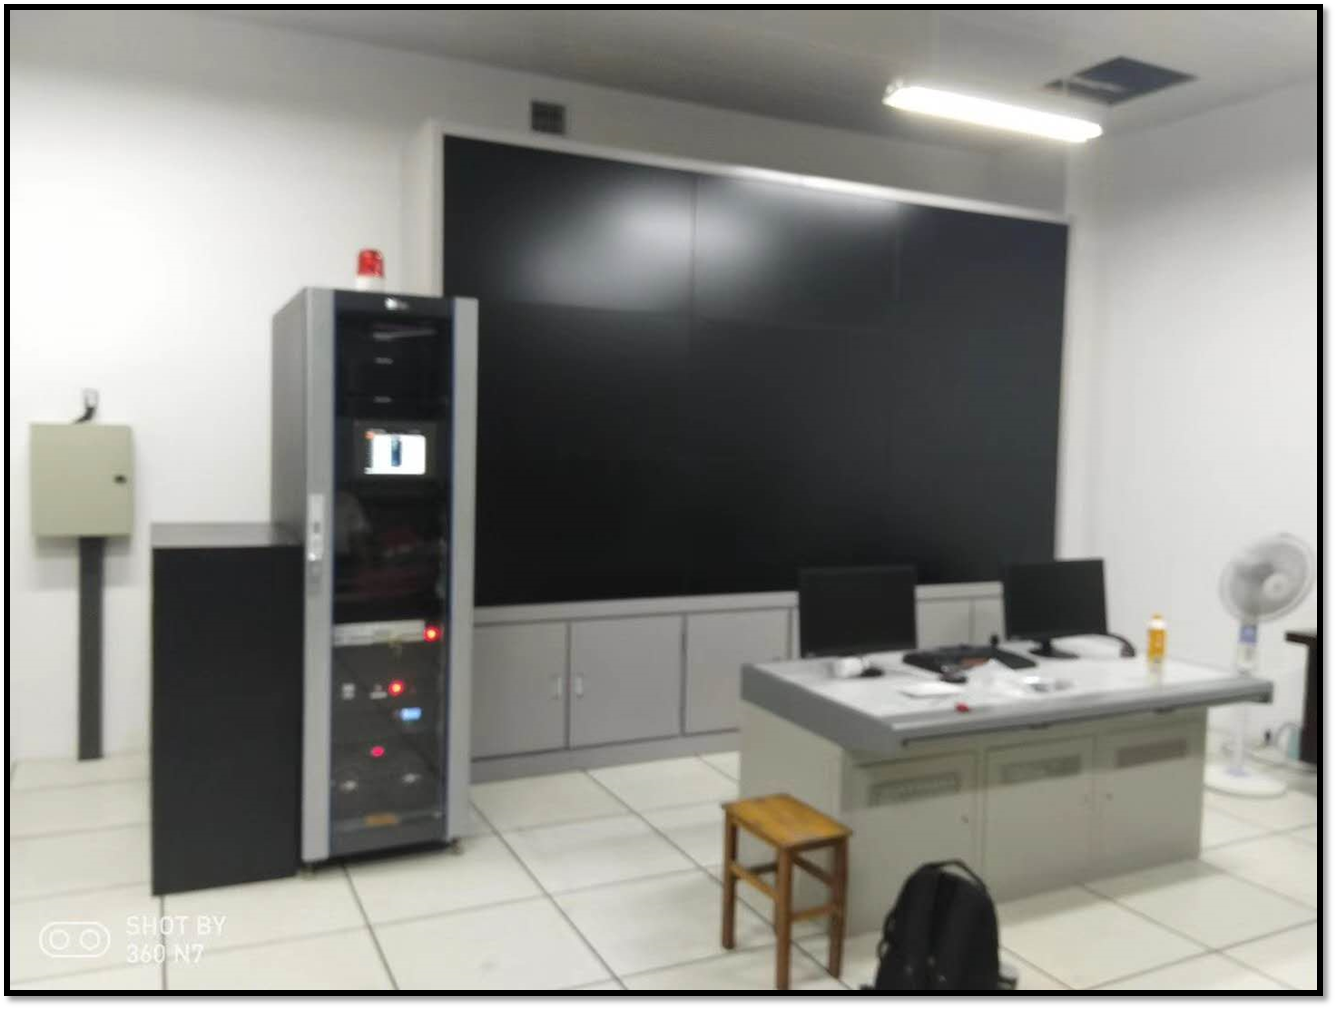 Factory It Infrastructure Security System, Integrated Smart Micro Data Center Telecom Cabinet